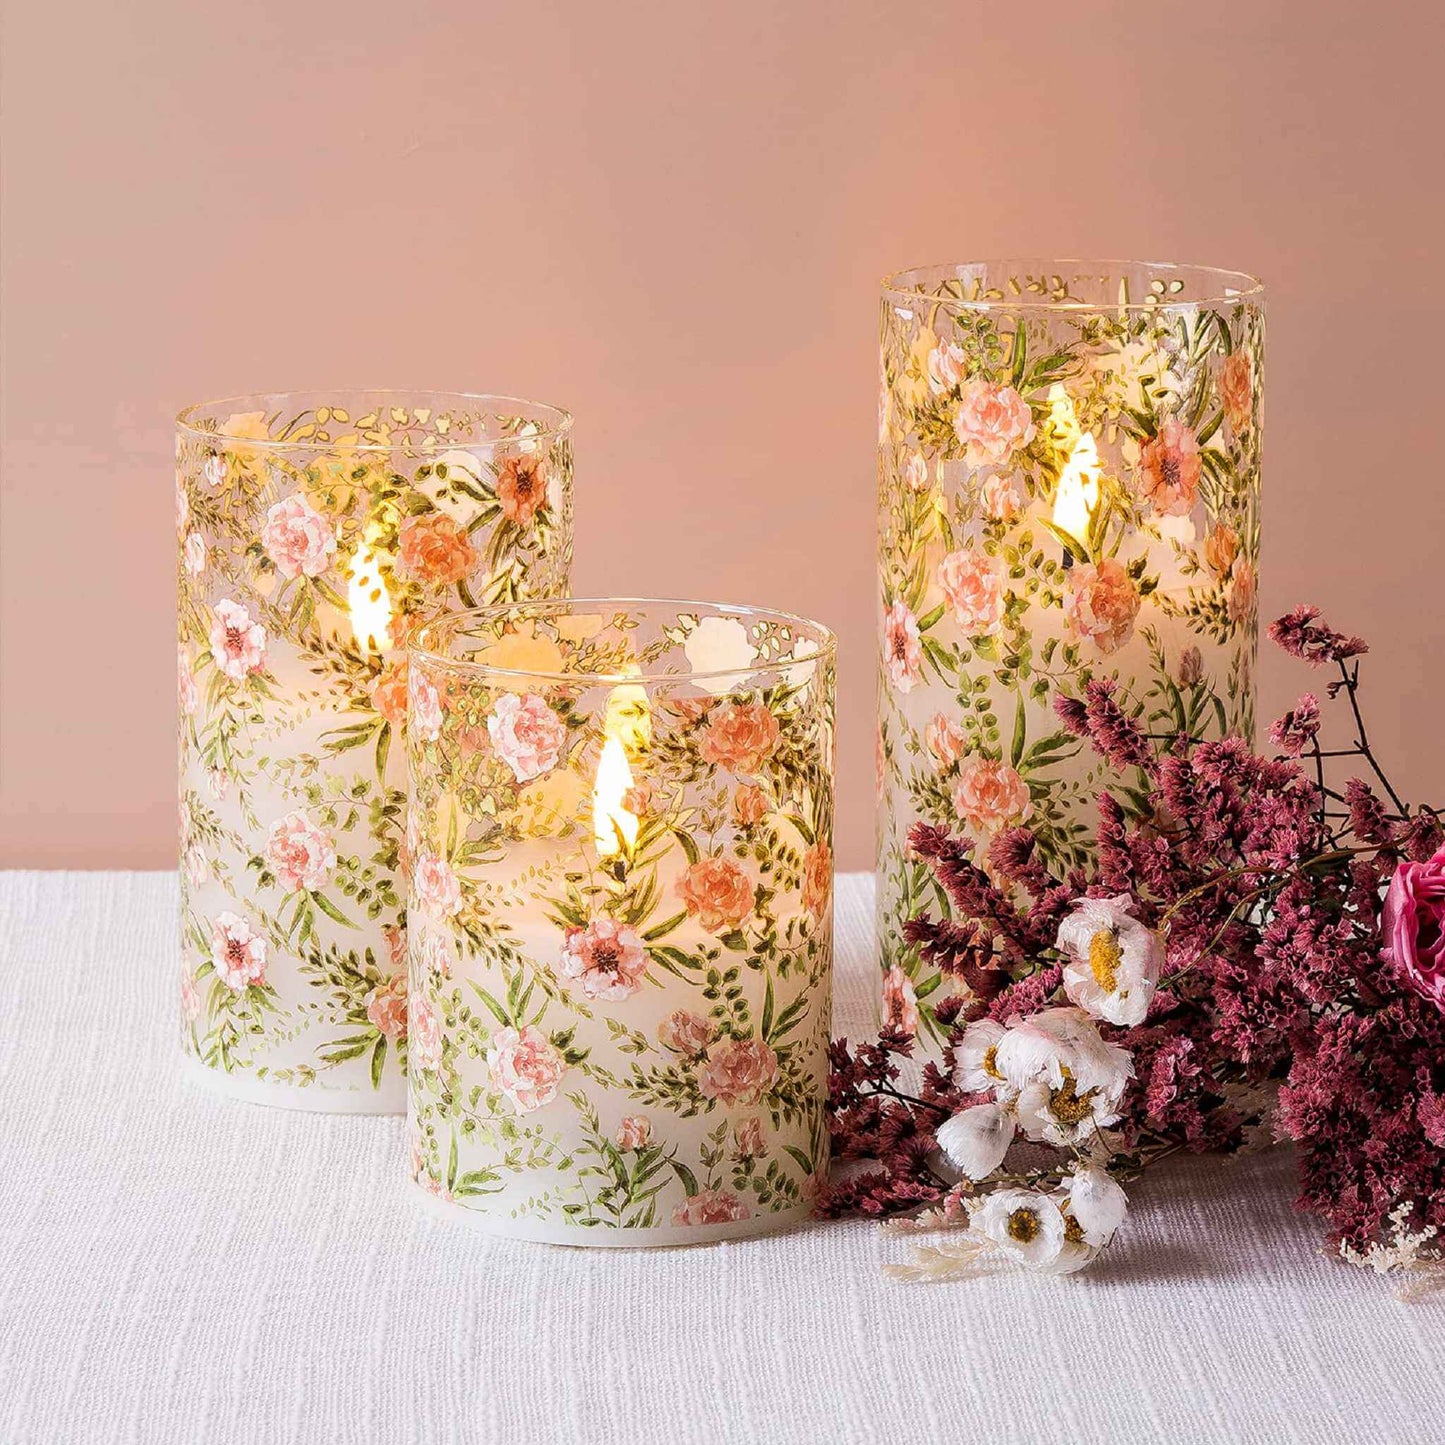 Three eywamage floral glass flameless candles lie on a white tablecloth with a bouquet of white and pink flowers next to them